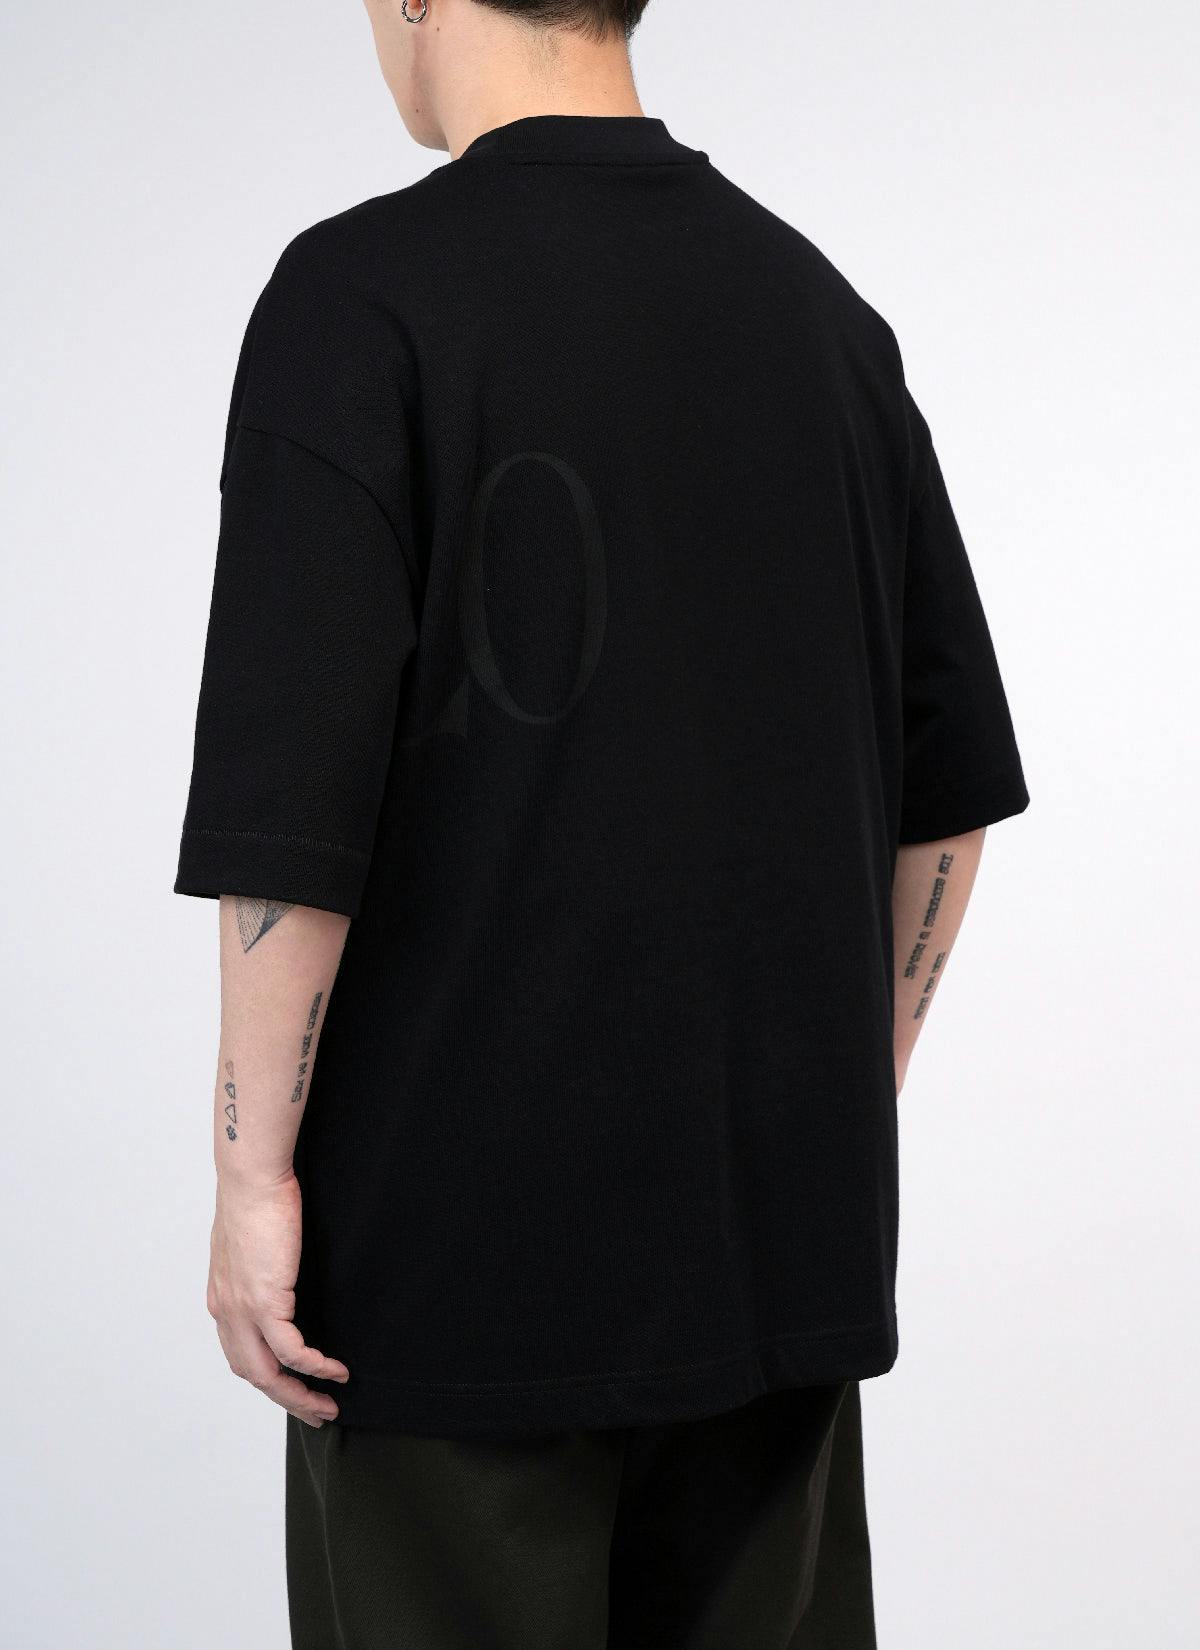 ˝HELLO˝  Relaxed T-Shirt Black